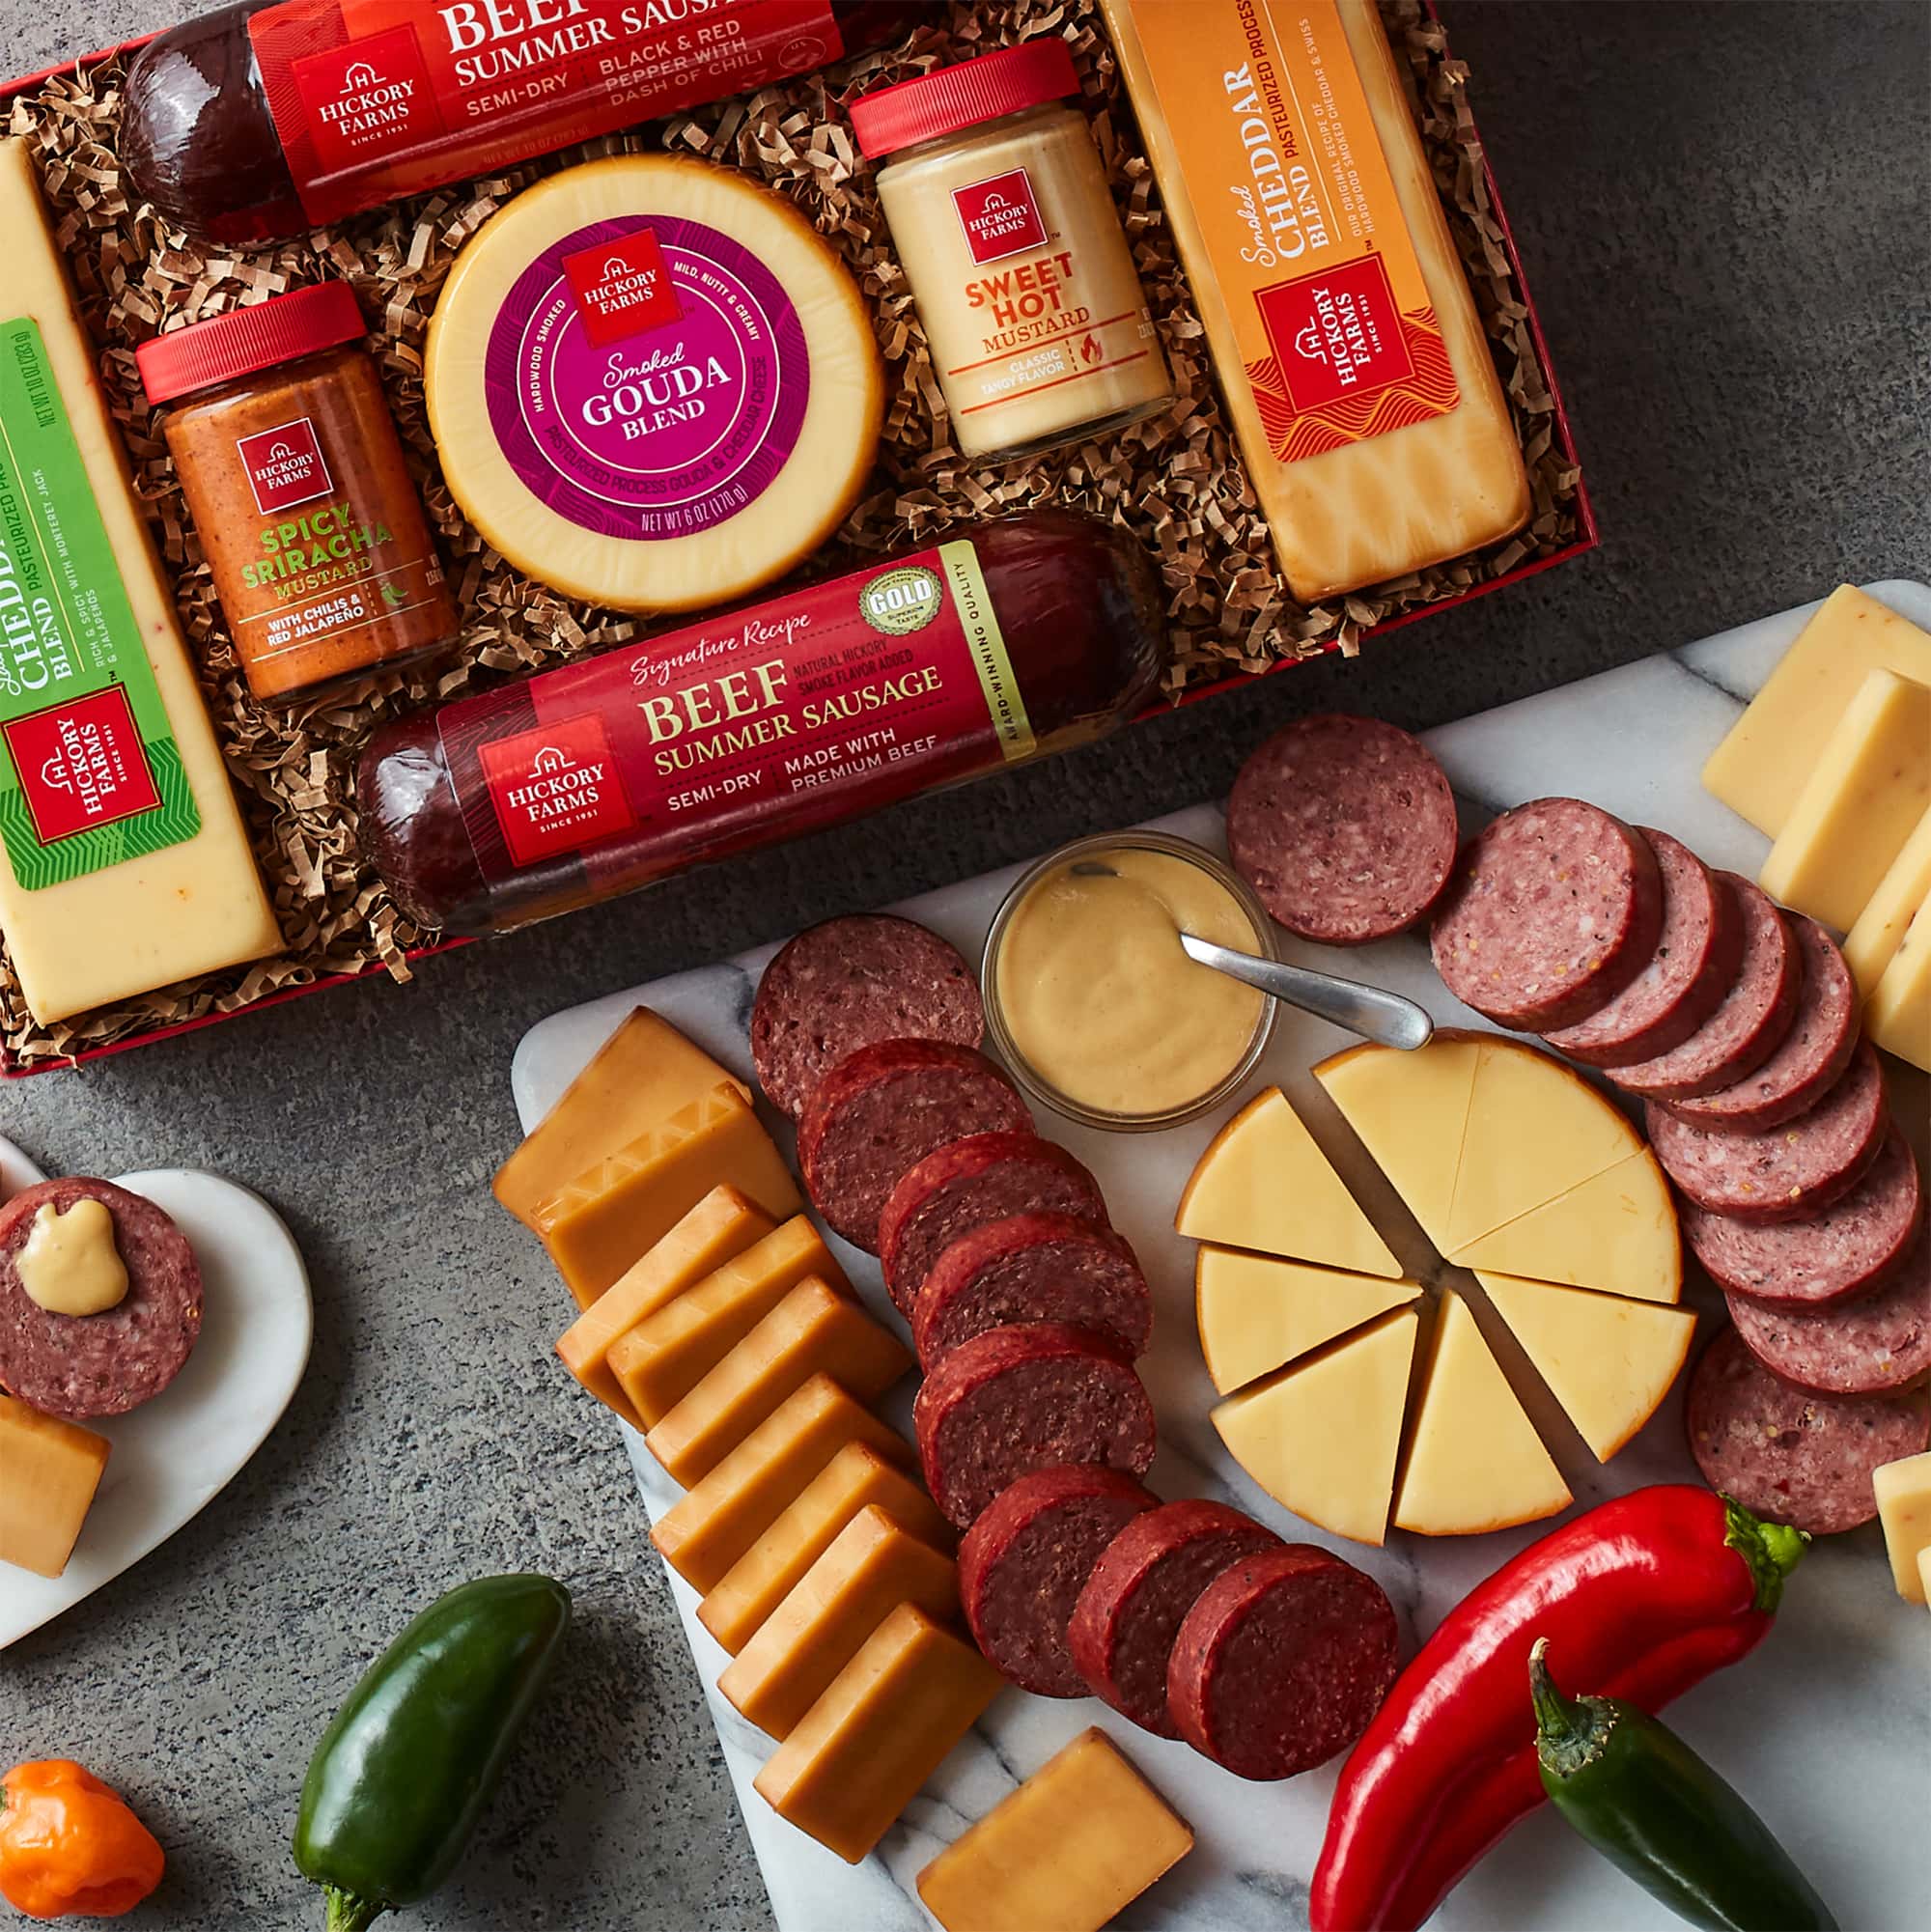 https://www.hickoryfarms.com/on/demandware.static/-/Sites-Web-Master-Catalog/default/dwcd7005fd/images/products/hot-stuff-summer-sausage-cheese-gift-box-006541-2.jpg